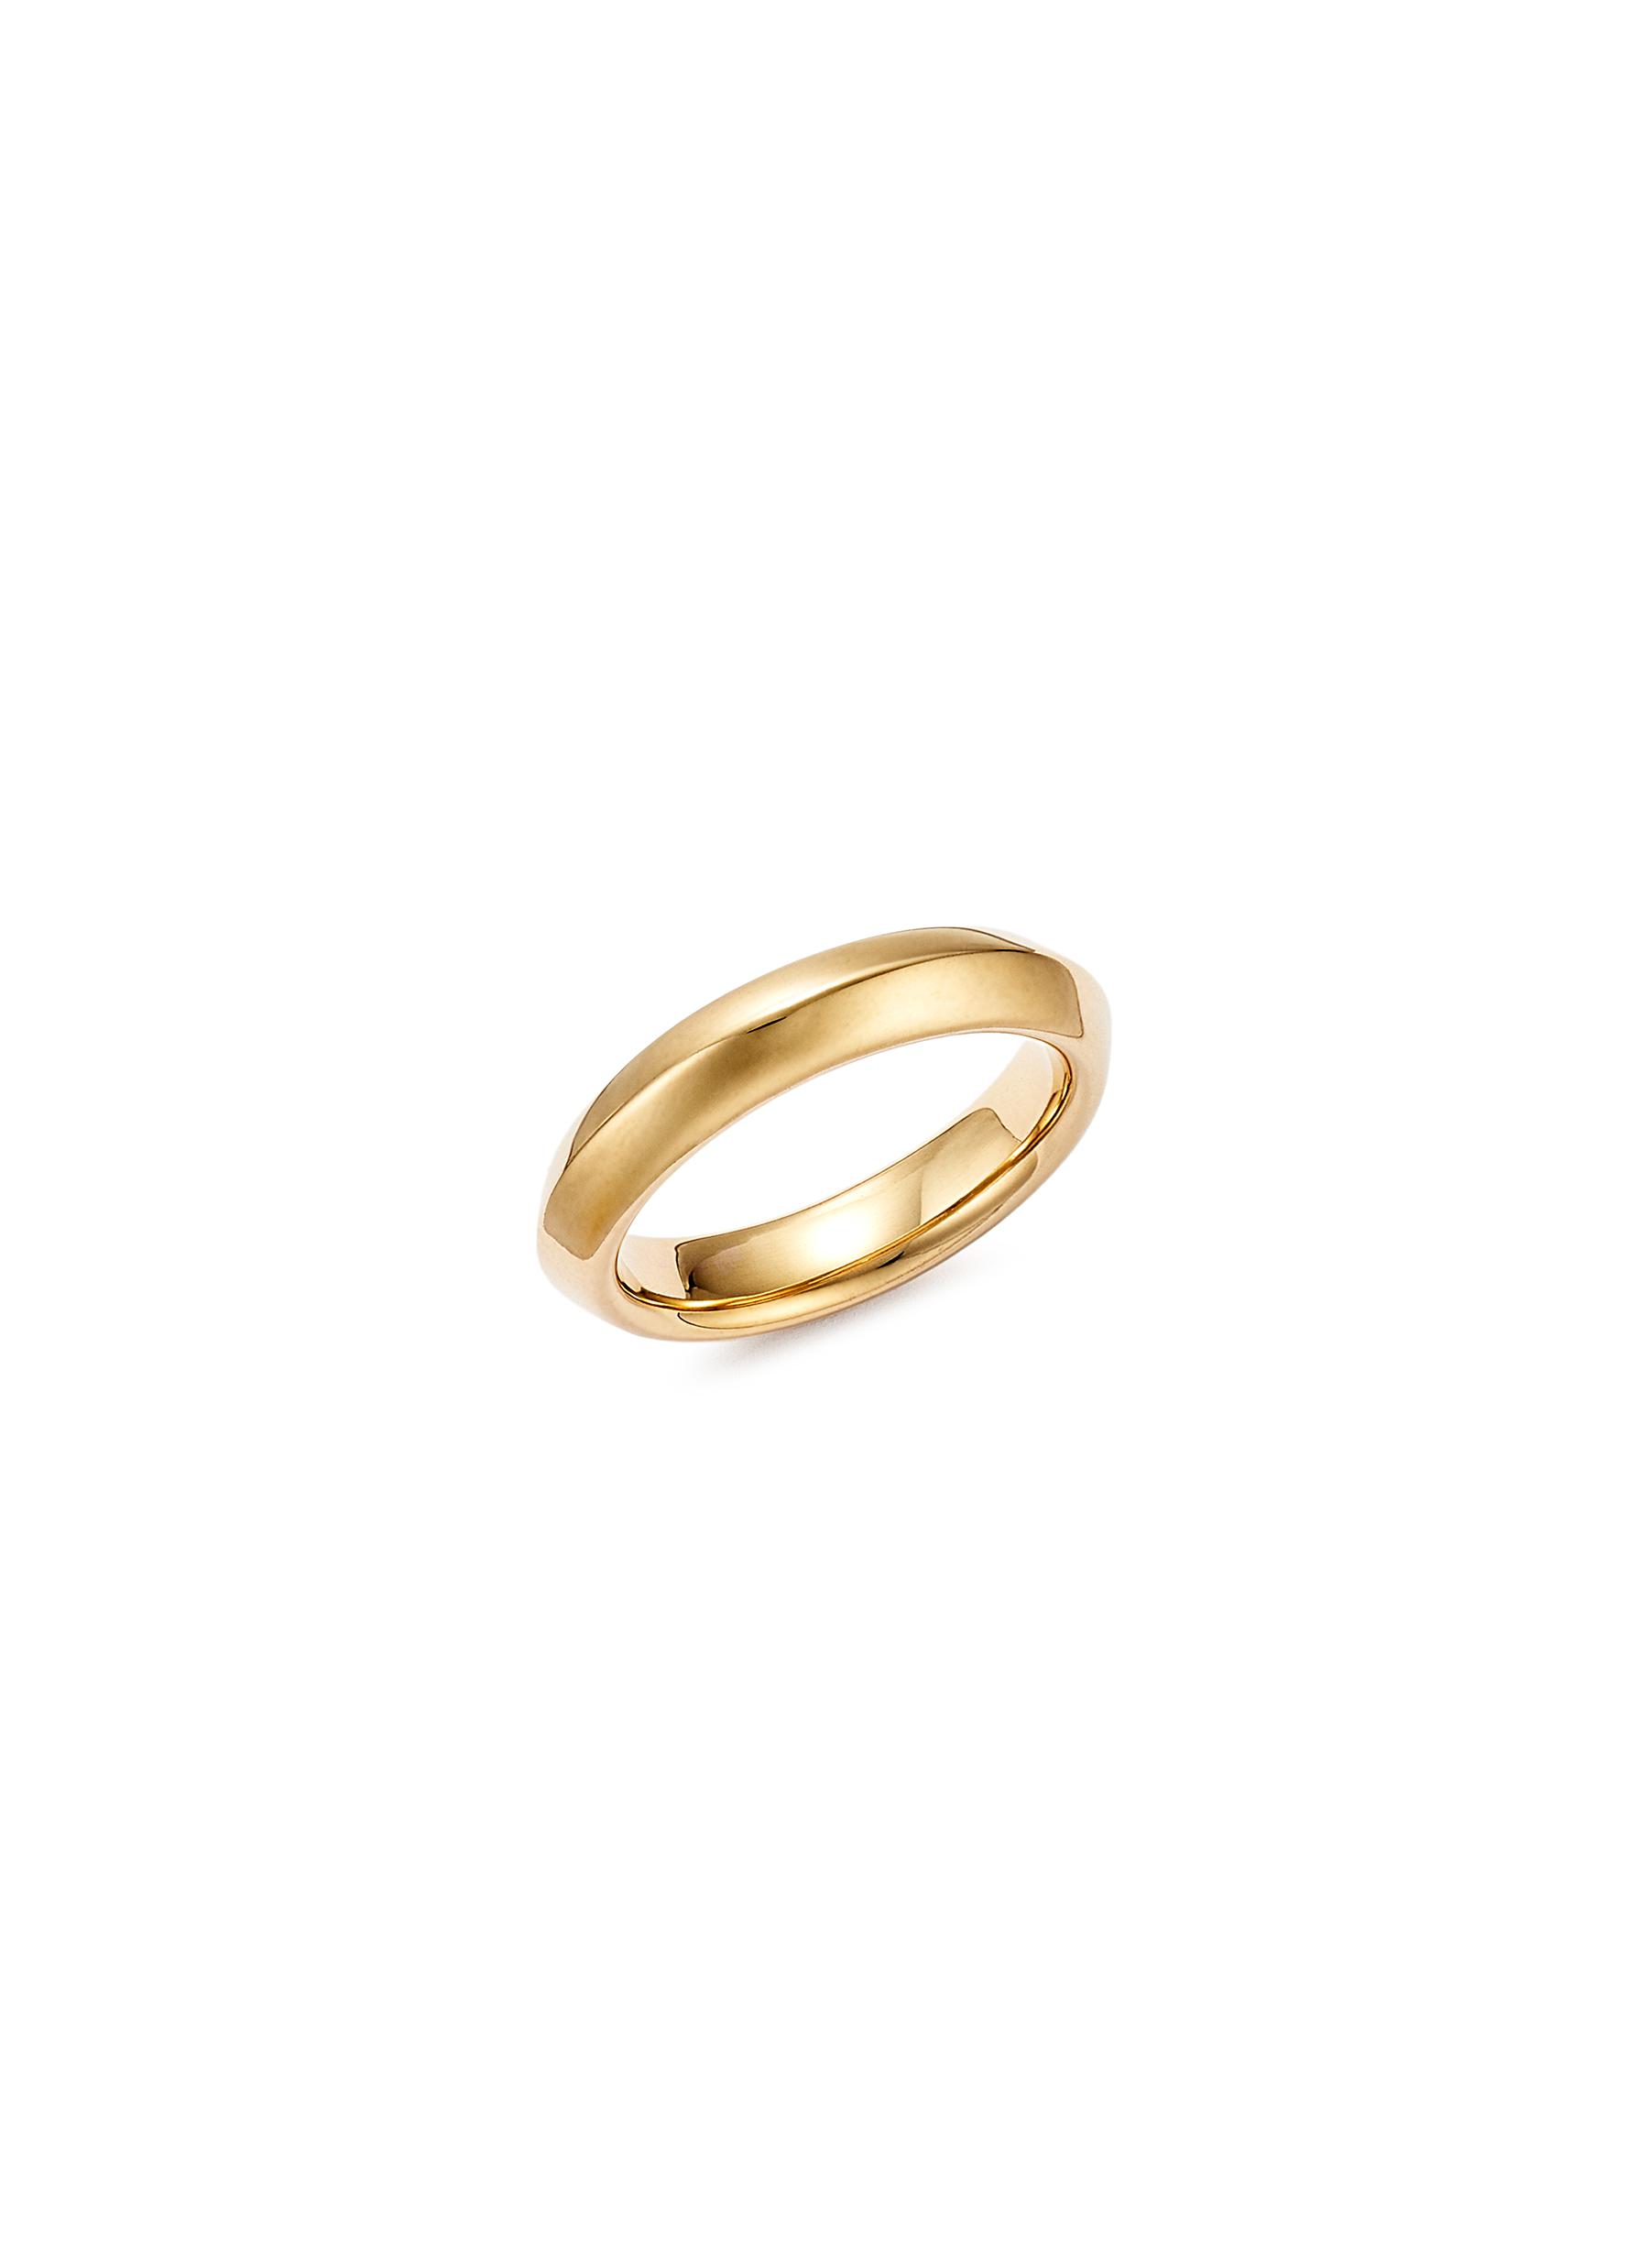 FUTURA 'AMORE' 18K FAIRMINED ECOLOGICAL GOLD RING